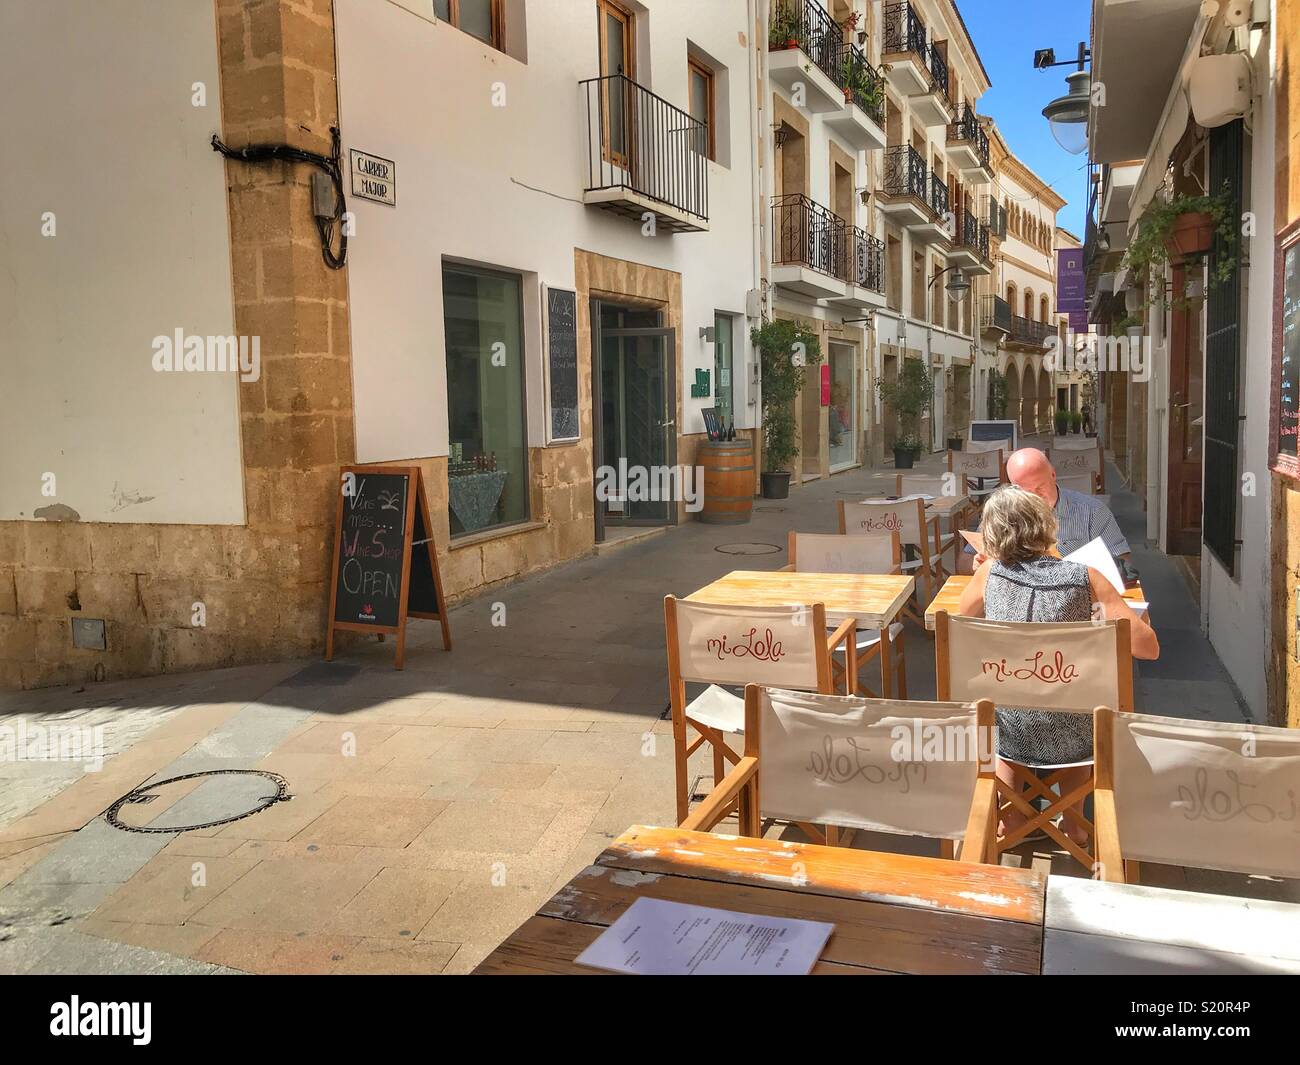 Street scene with couple at outdoor cafe, in the Old Town area of Javea / Xabia on the Costa Blanca, Spain Stock Photo